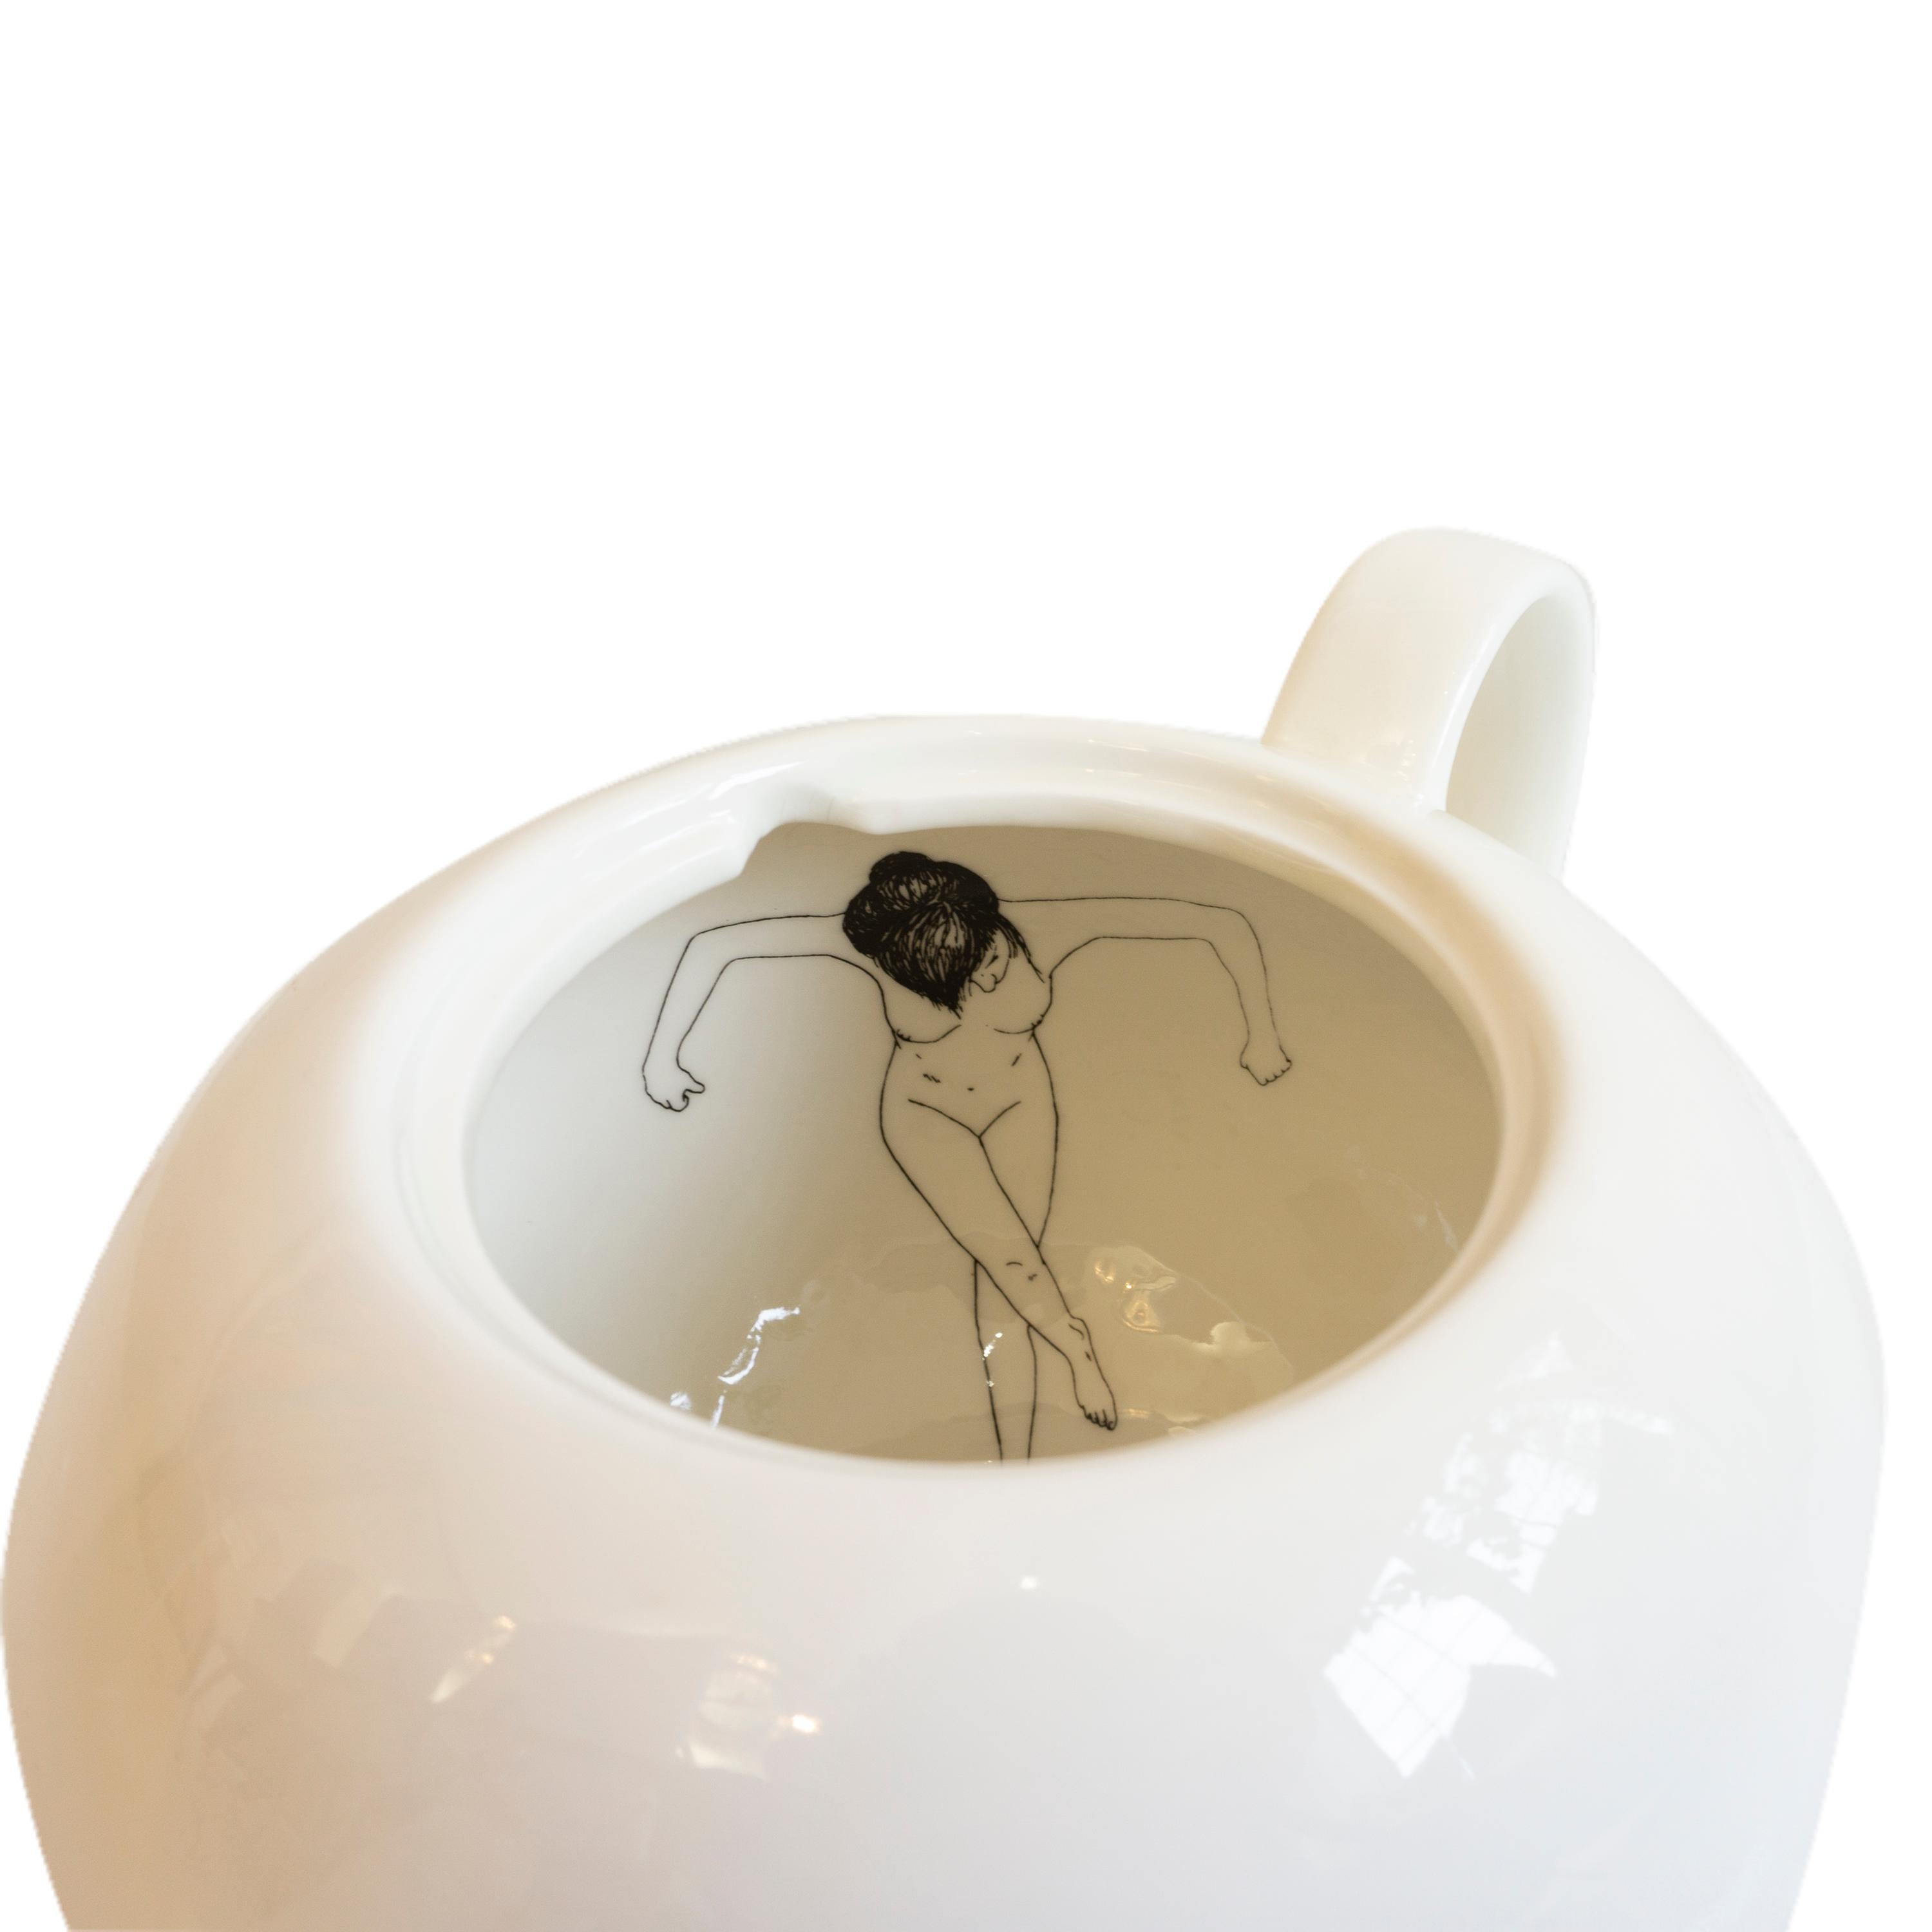 Modern Porcelain Tea Pot with Undressed Woman For Sale